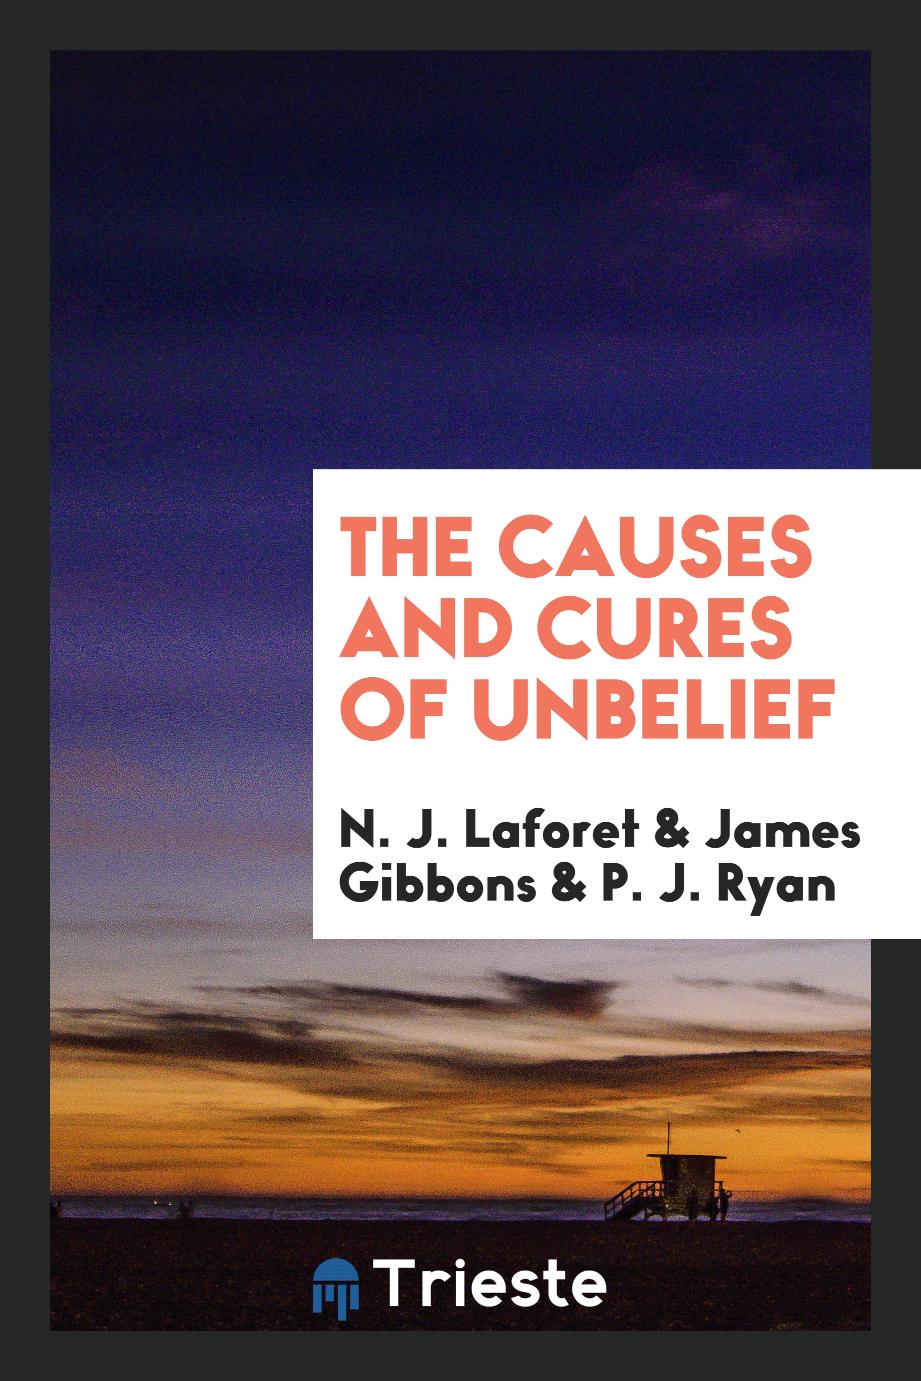 The causes and cures of unbelief